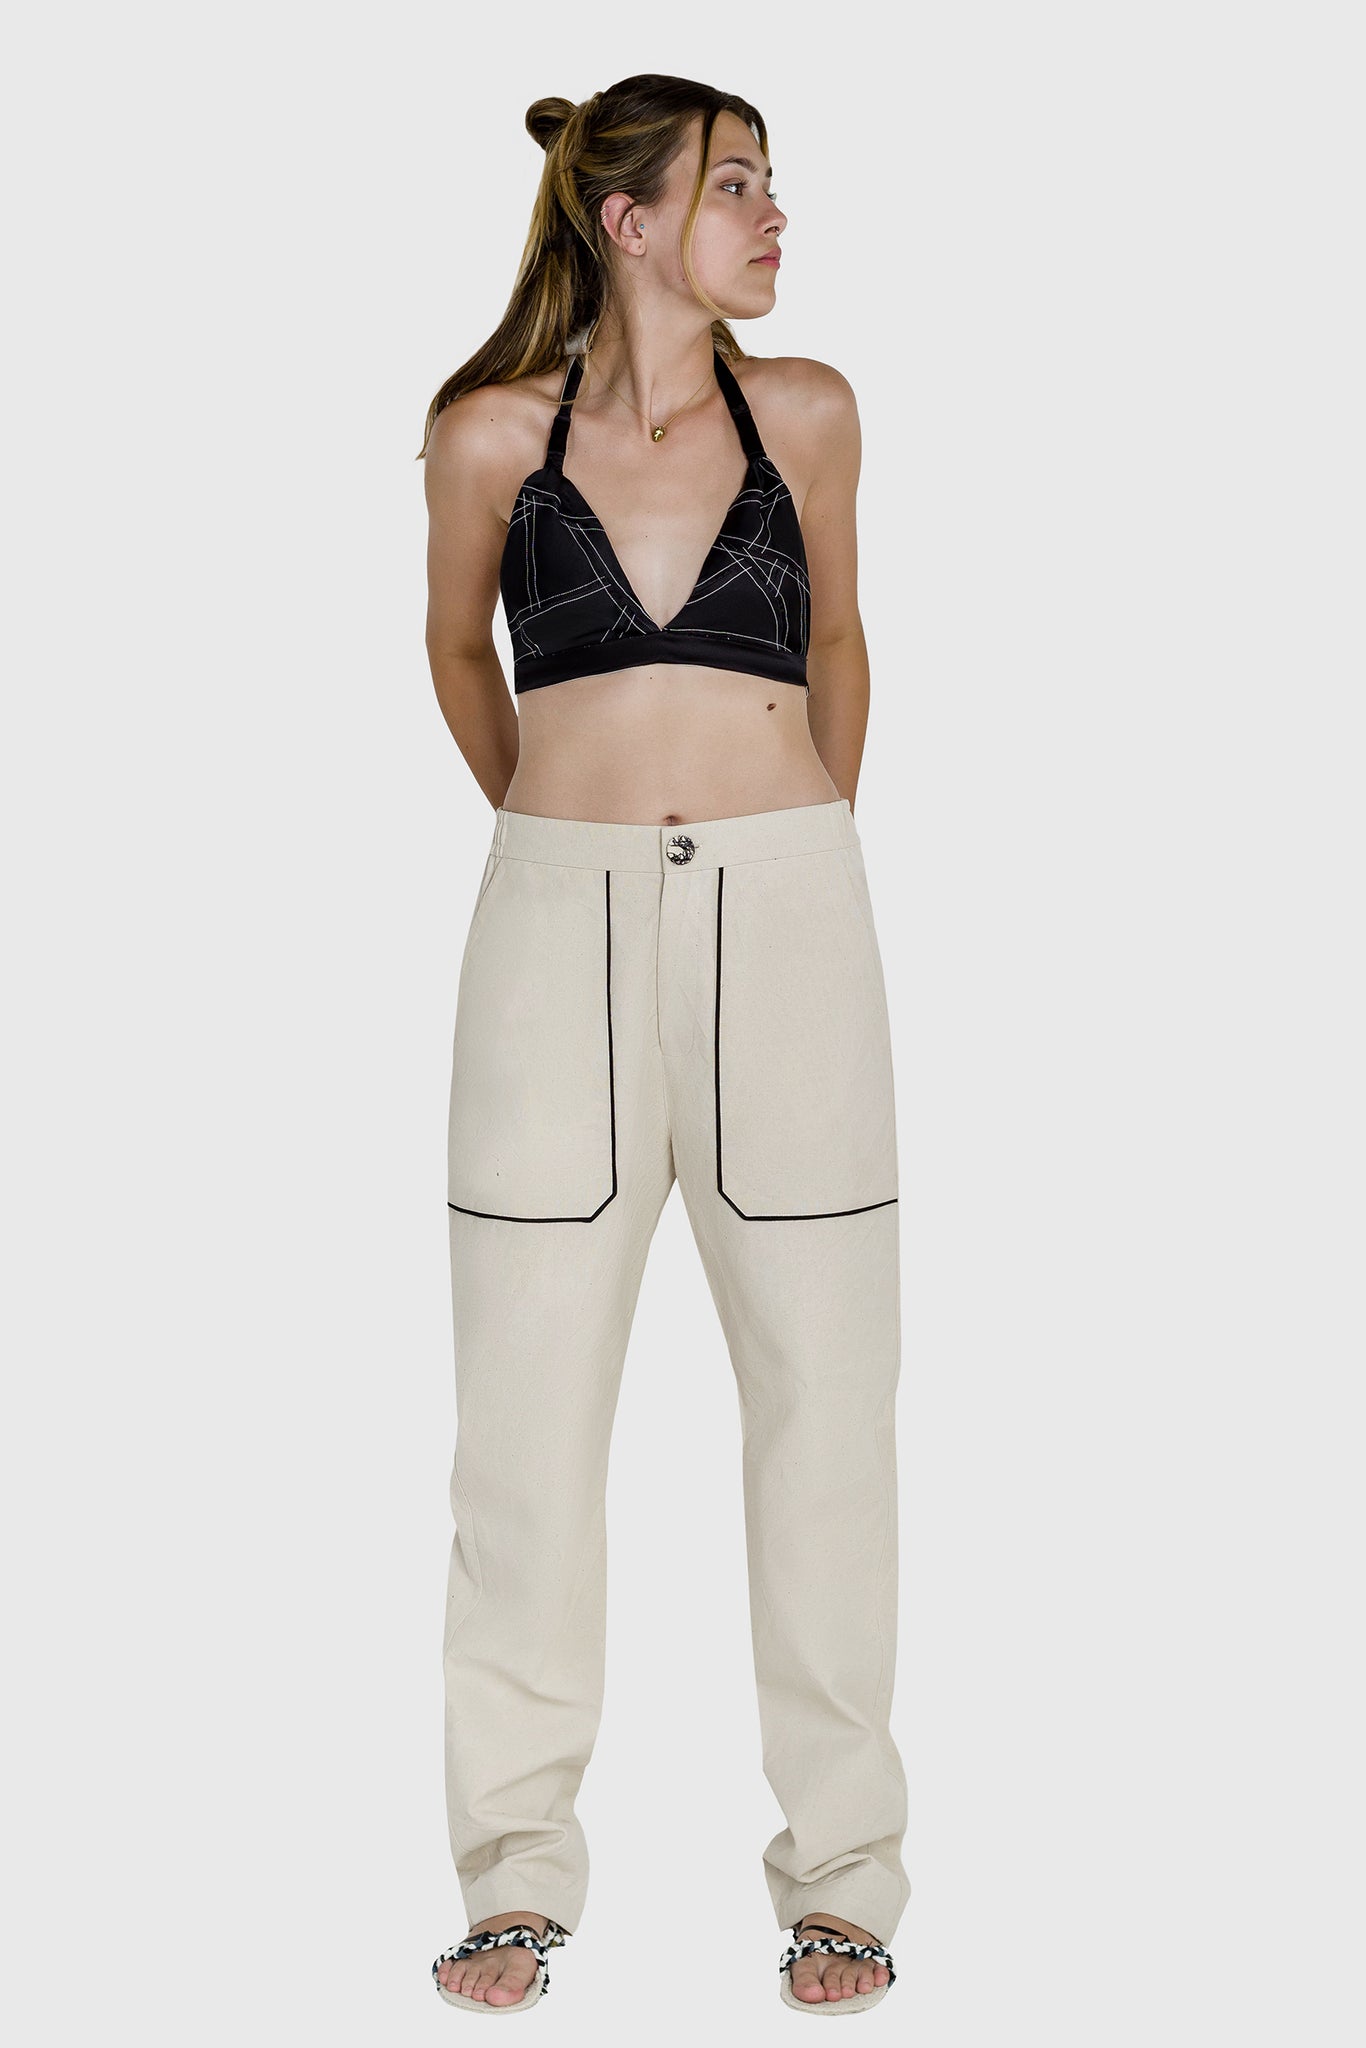 Ruxandra favorite fit, white cotton trousers, black silk bra, contrasting over-thread, front and back pockets, geometric cuts, modernist look 